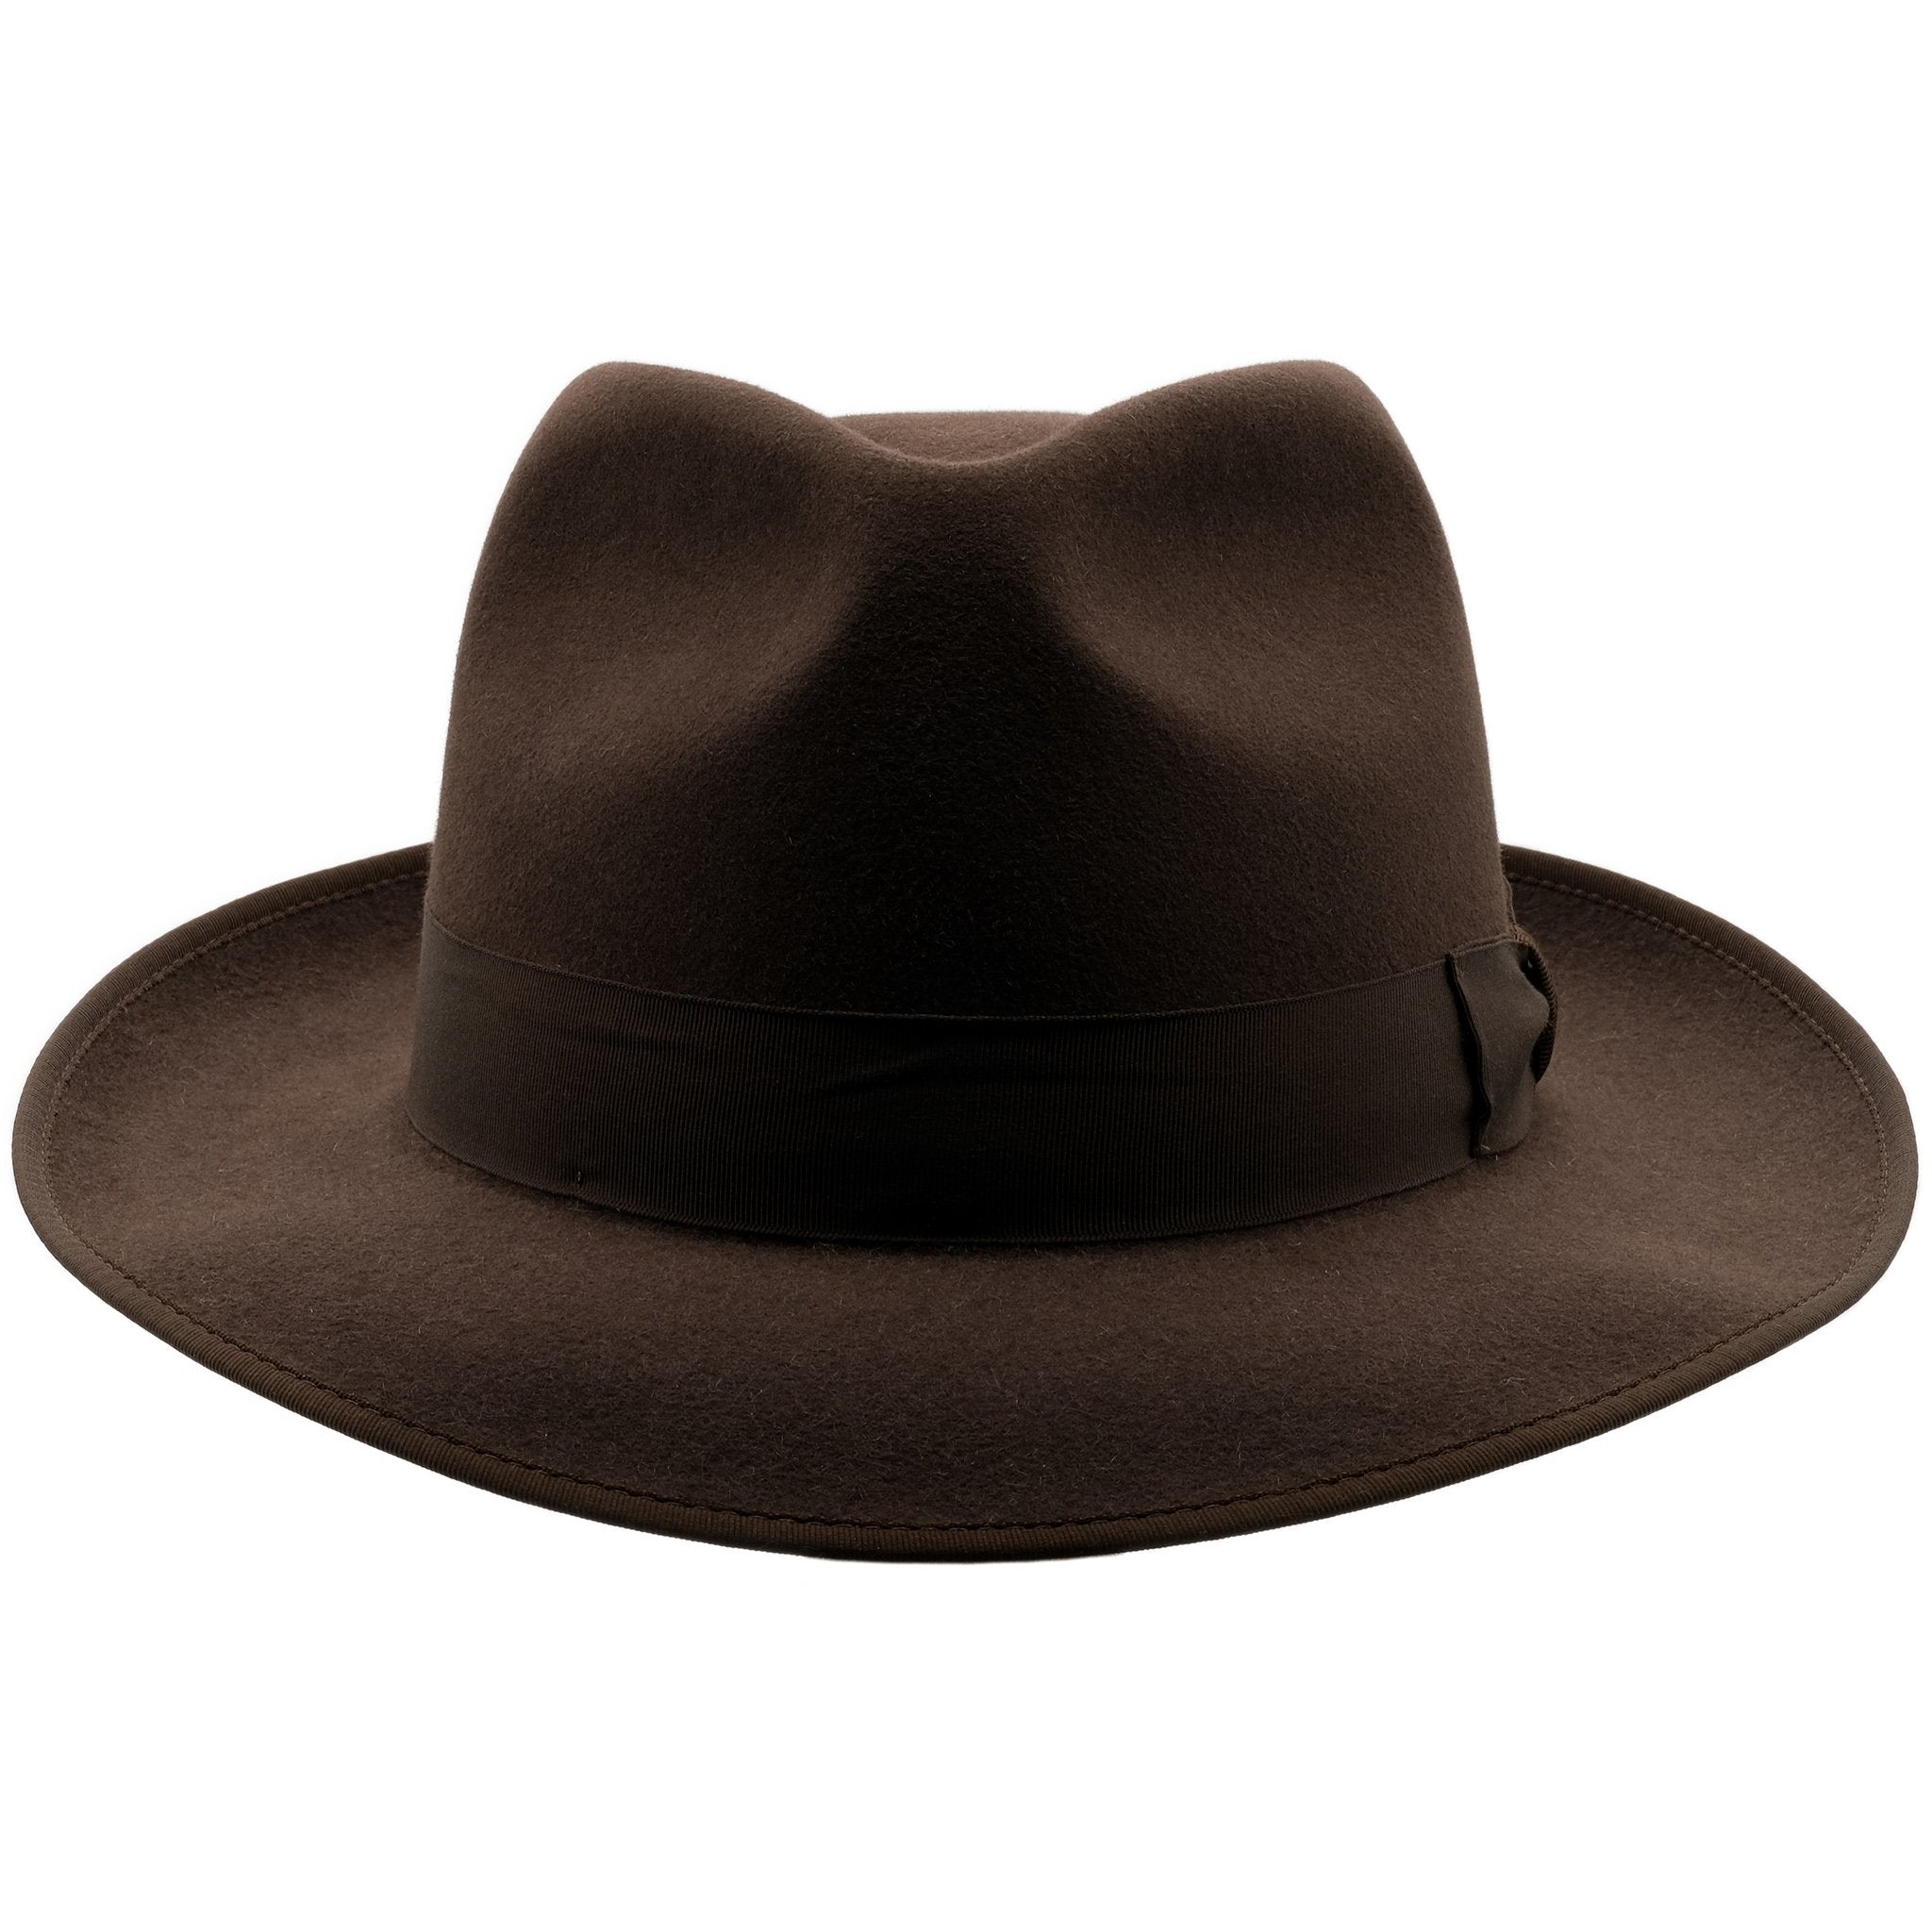 Front view of Akubra Stylemaster hat in Loden colour